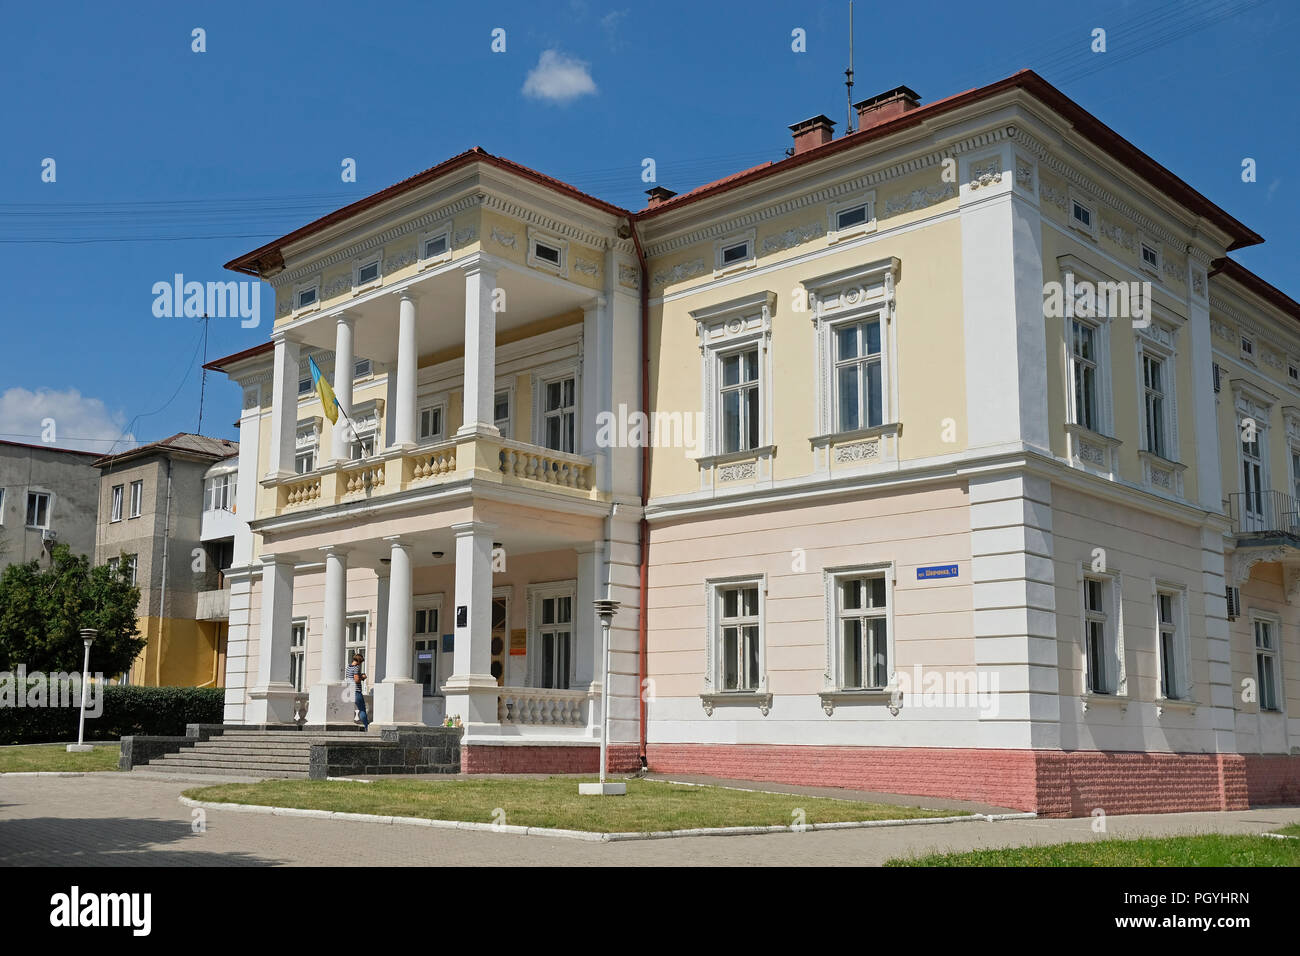 An old building in the city of Drohobycz or Drohobych which was once home to a large Jewish community. Ukraine Stock Photo